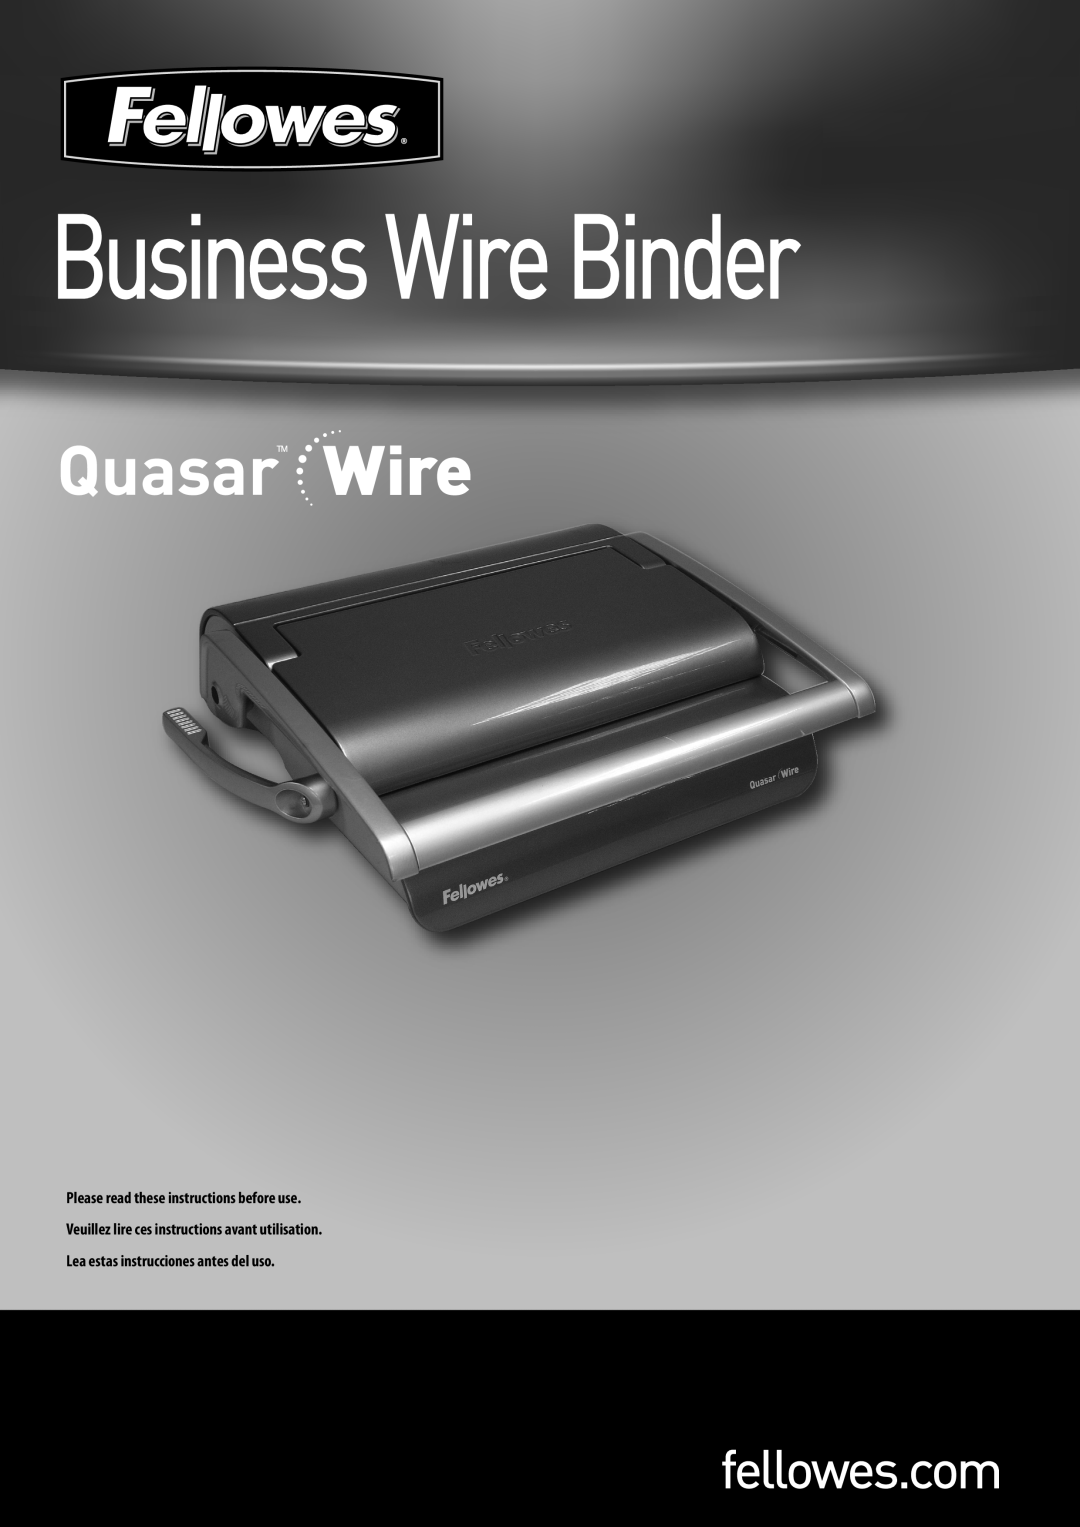 Fellowes 403054 manual Business Wire Binder, fellowes.com 